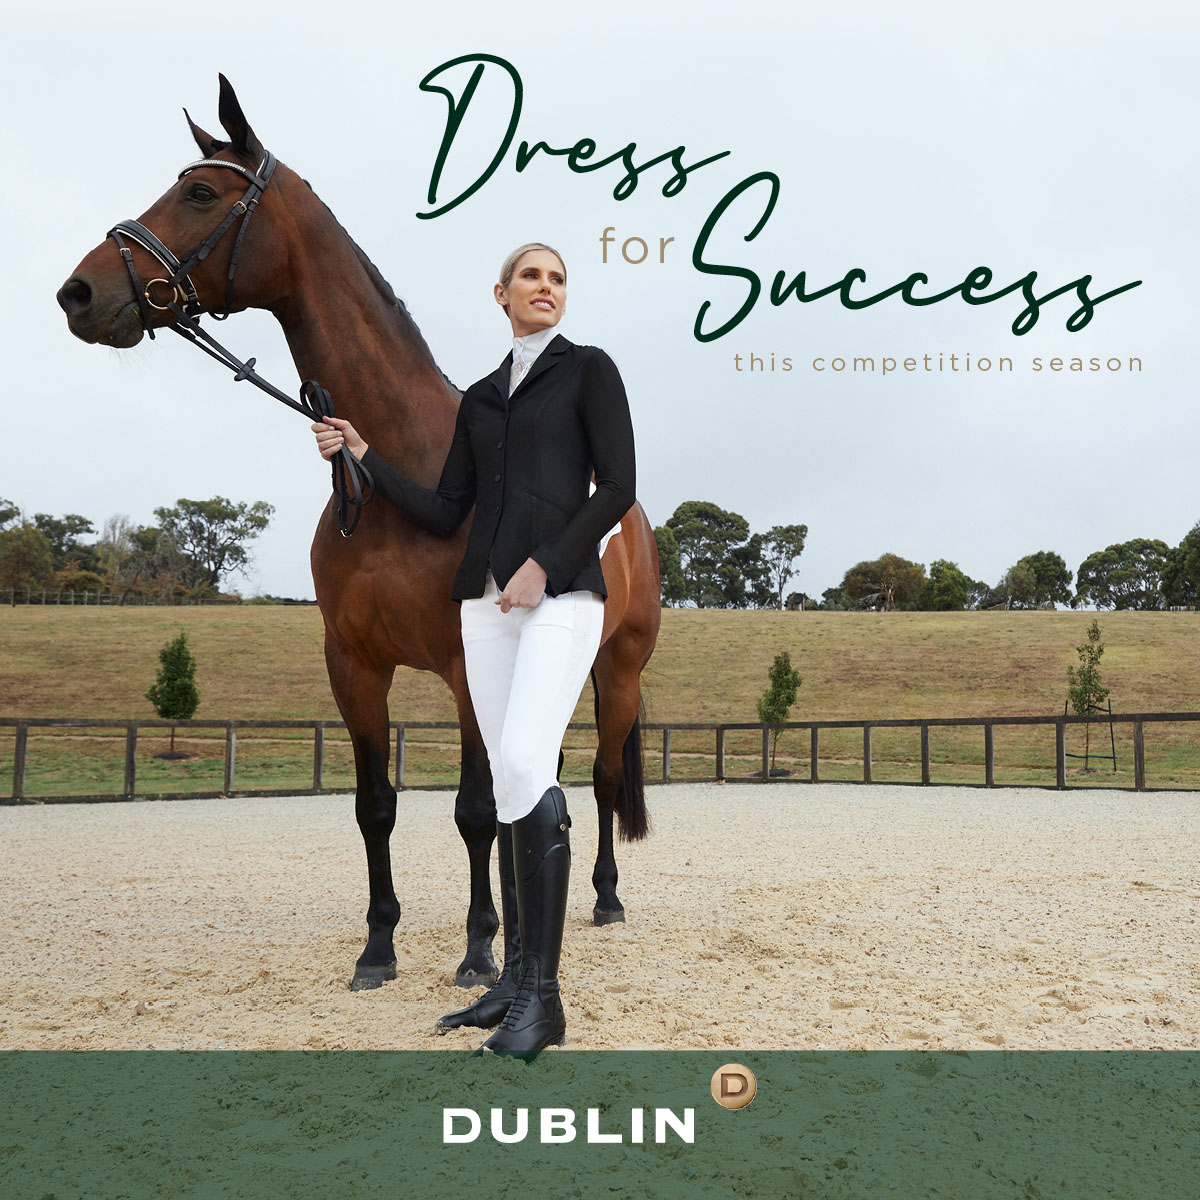 What to Wear for Dressage